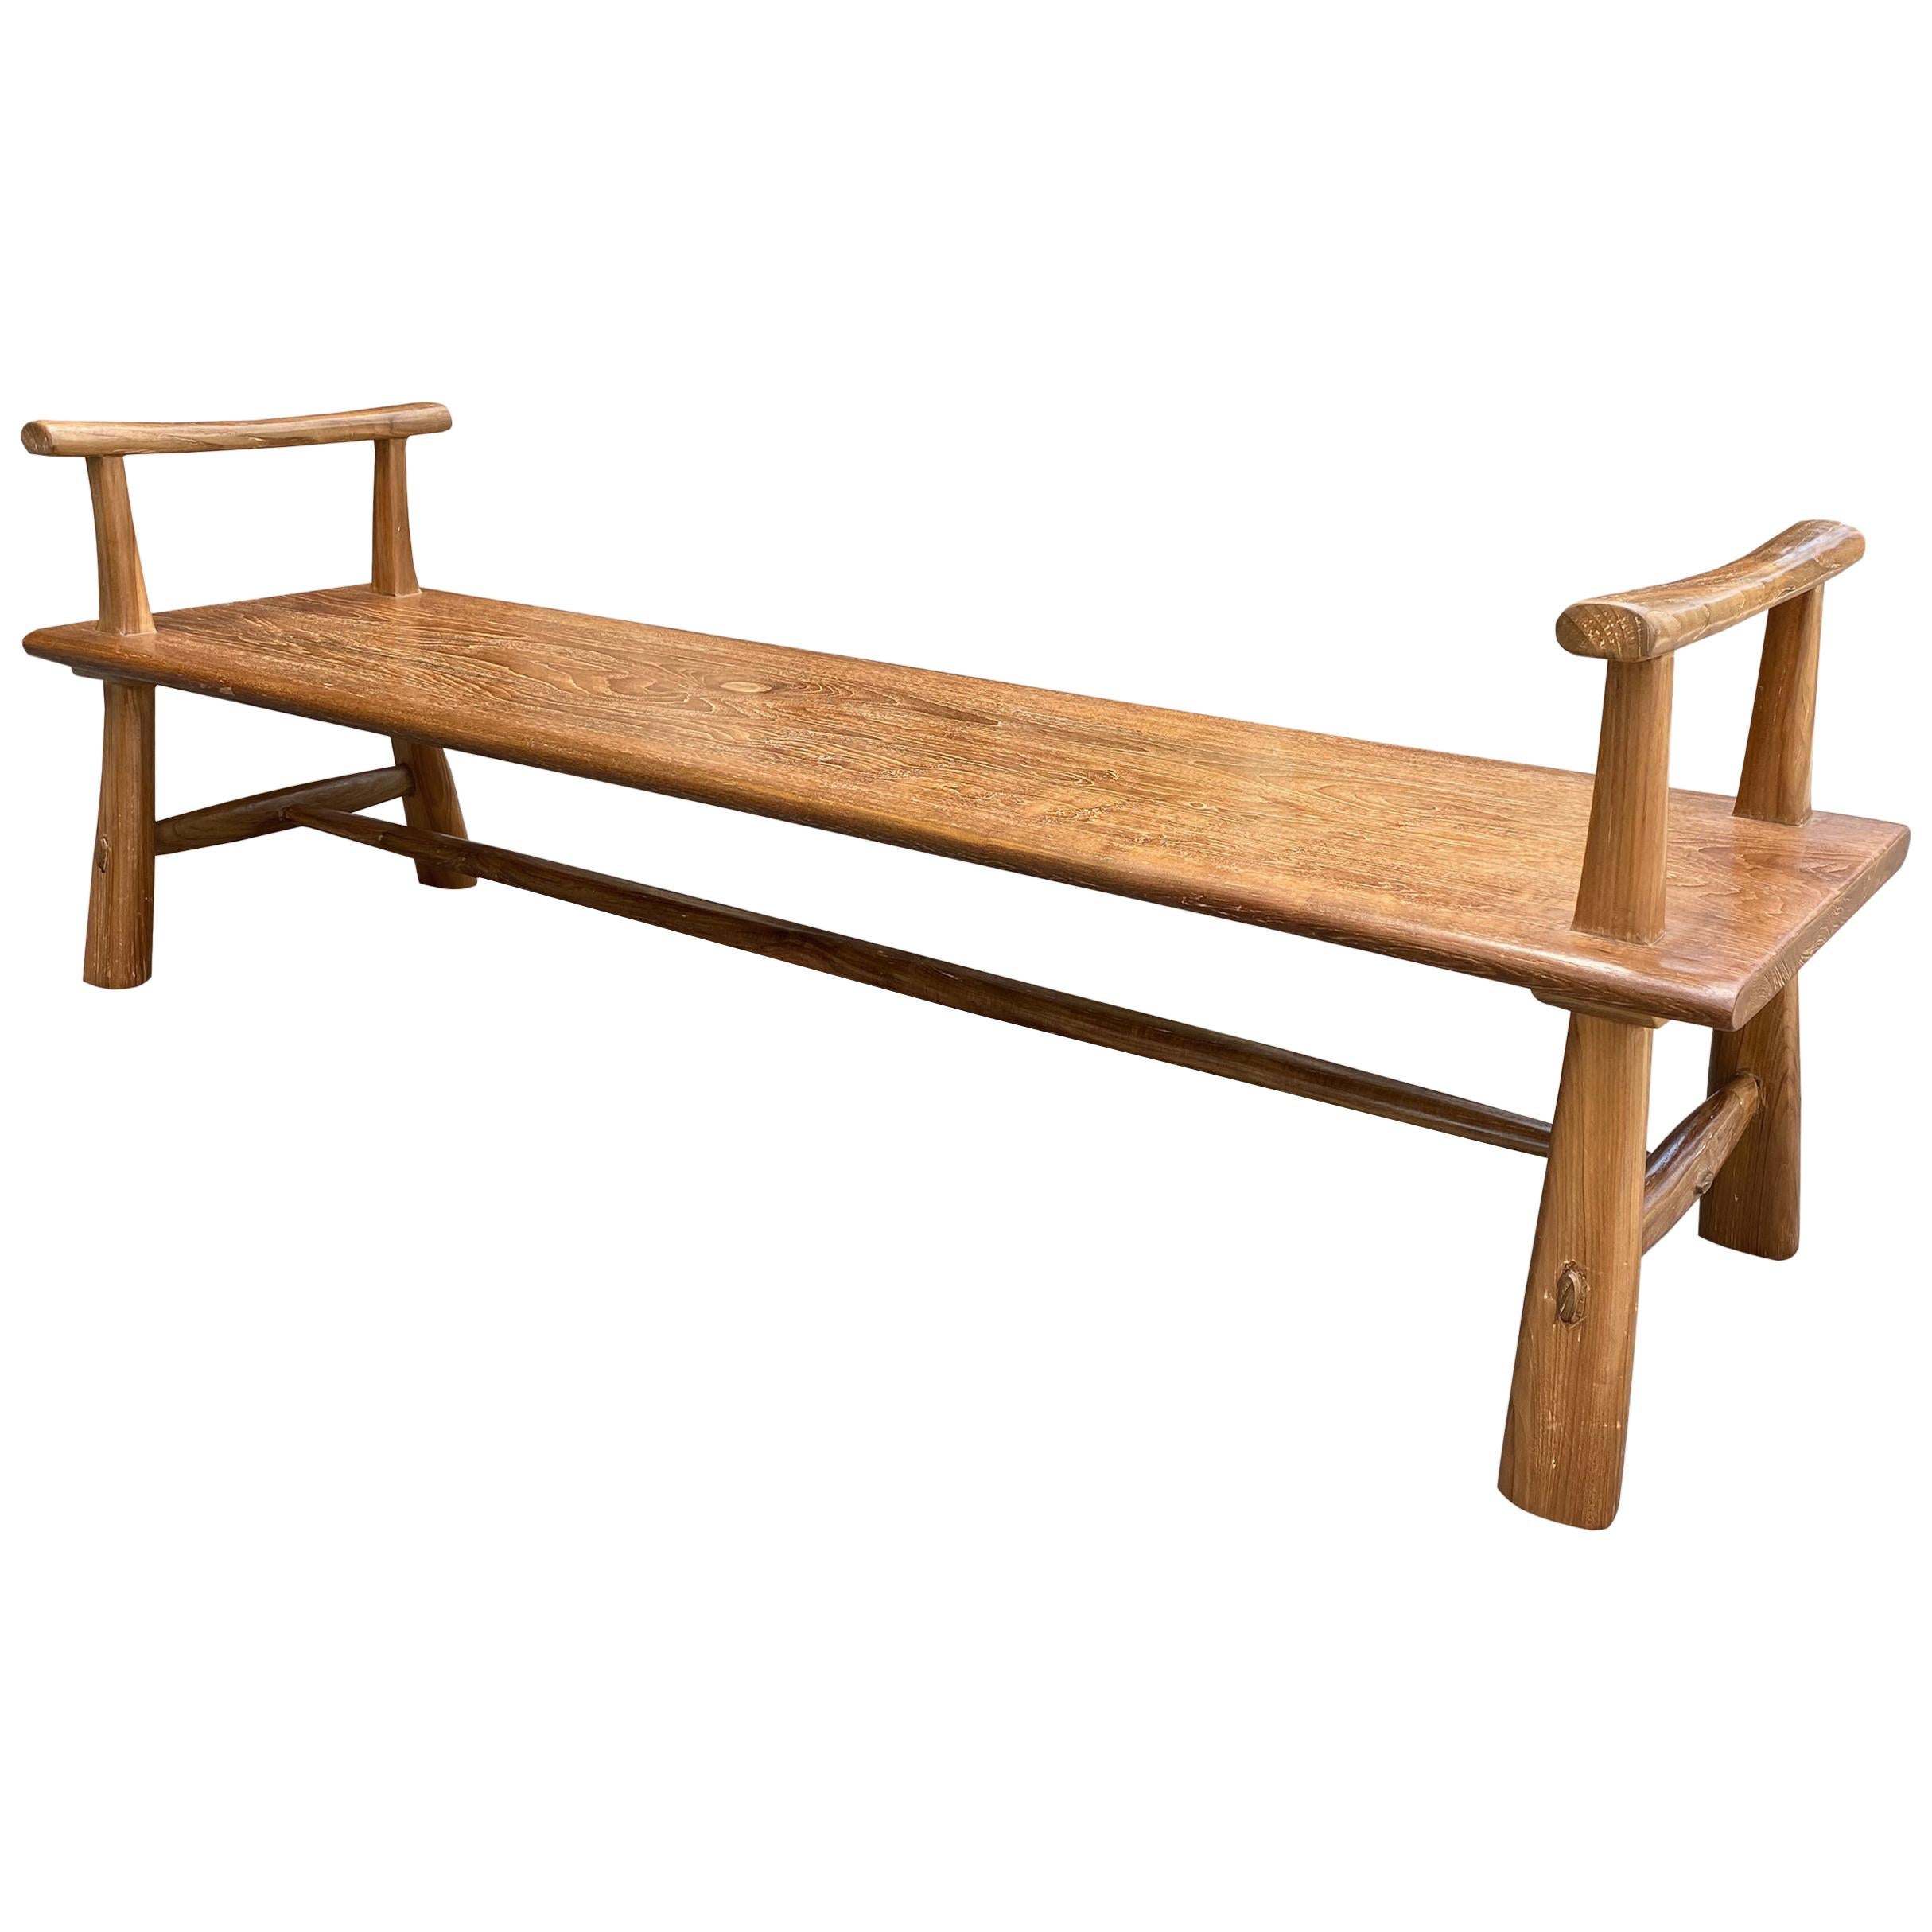 Andrianna Shamaris Midcentury Couture Teak Wood Bench with Arms For Sale